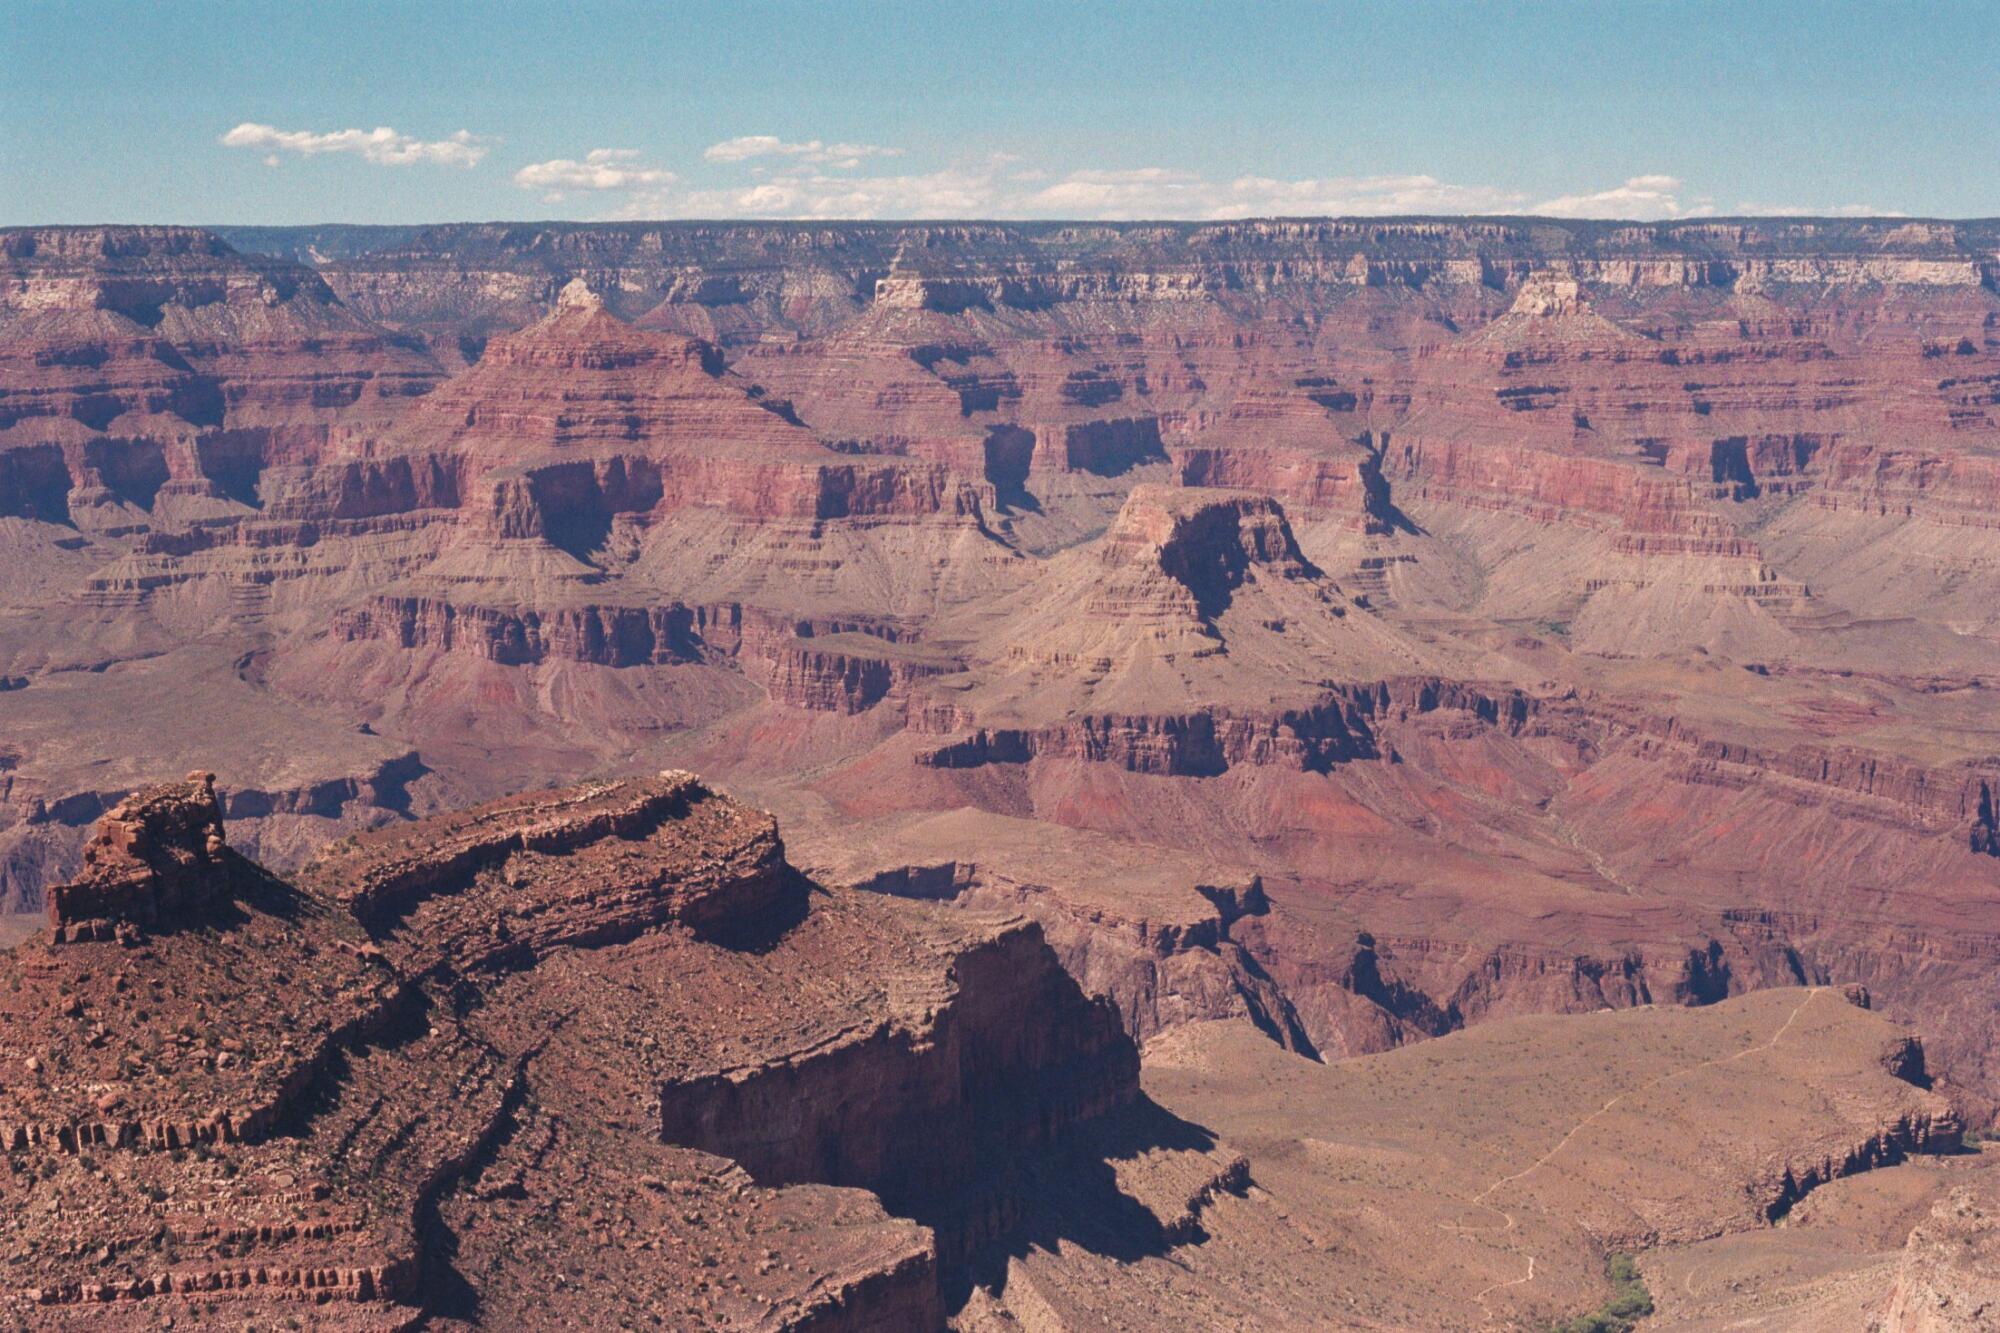 The South Rim of the Grand Canyon.